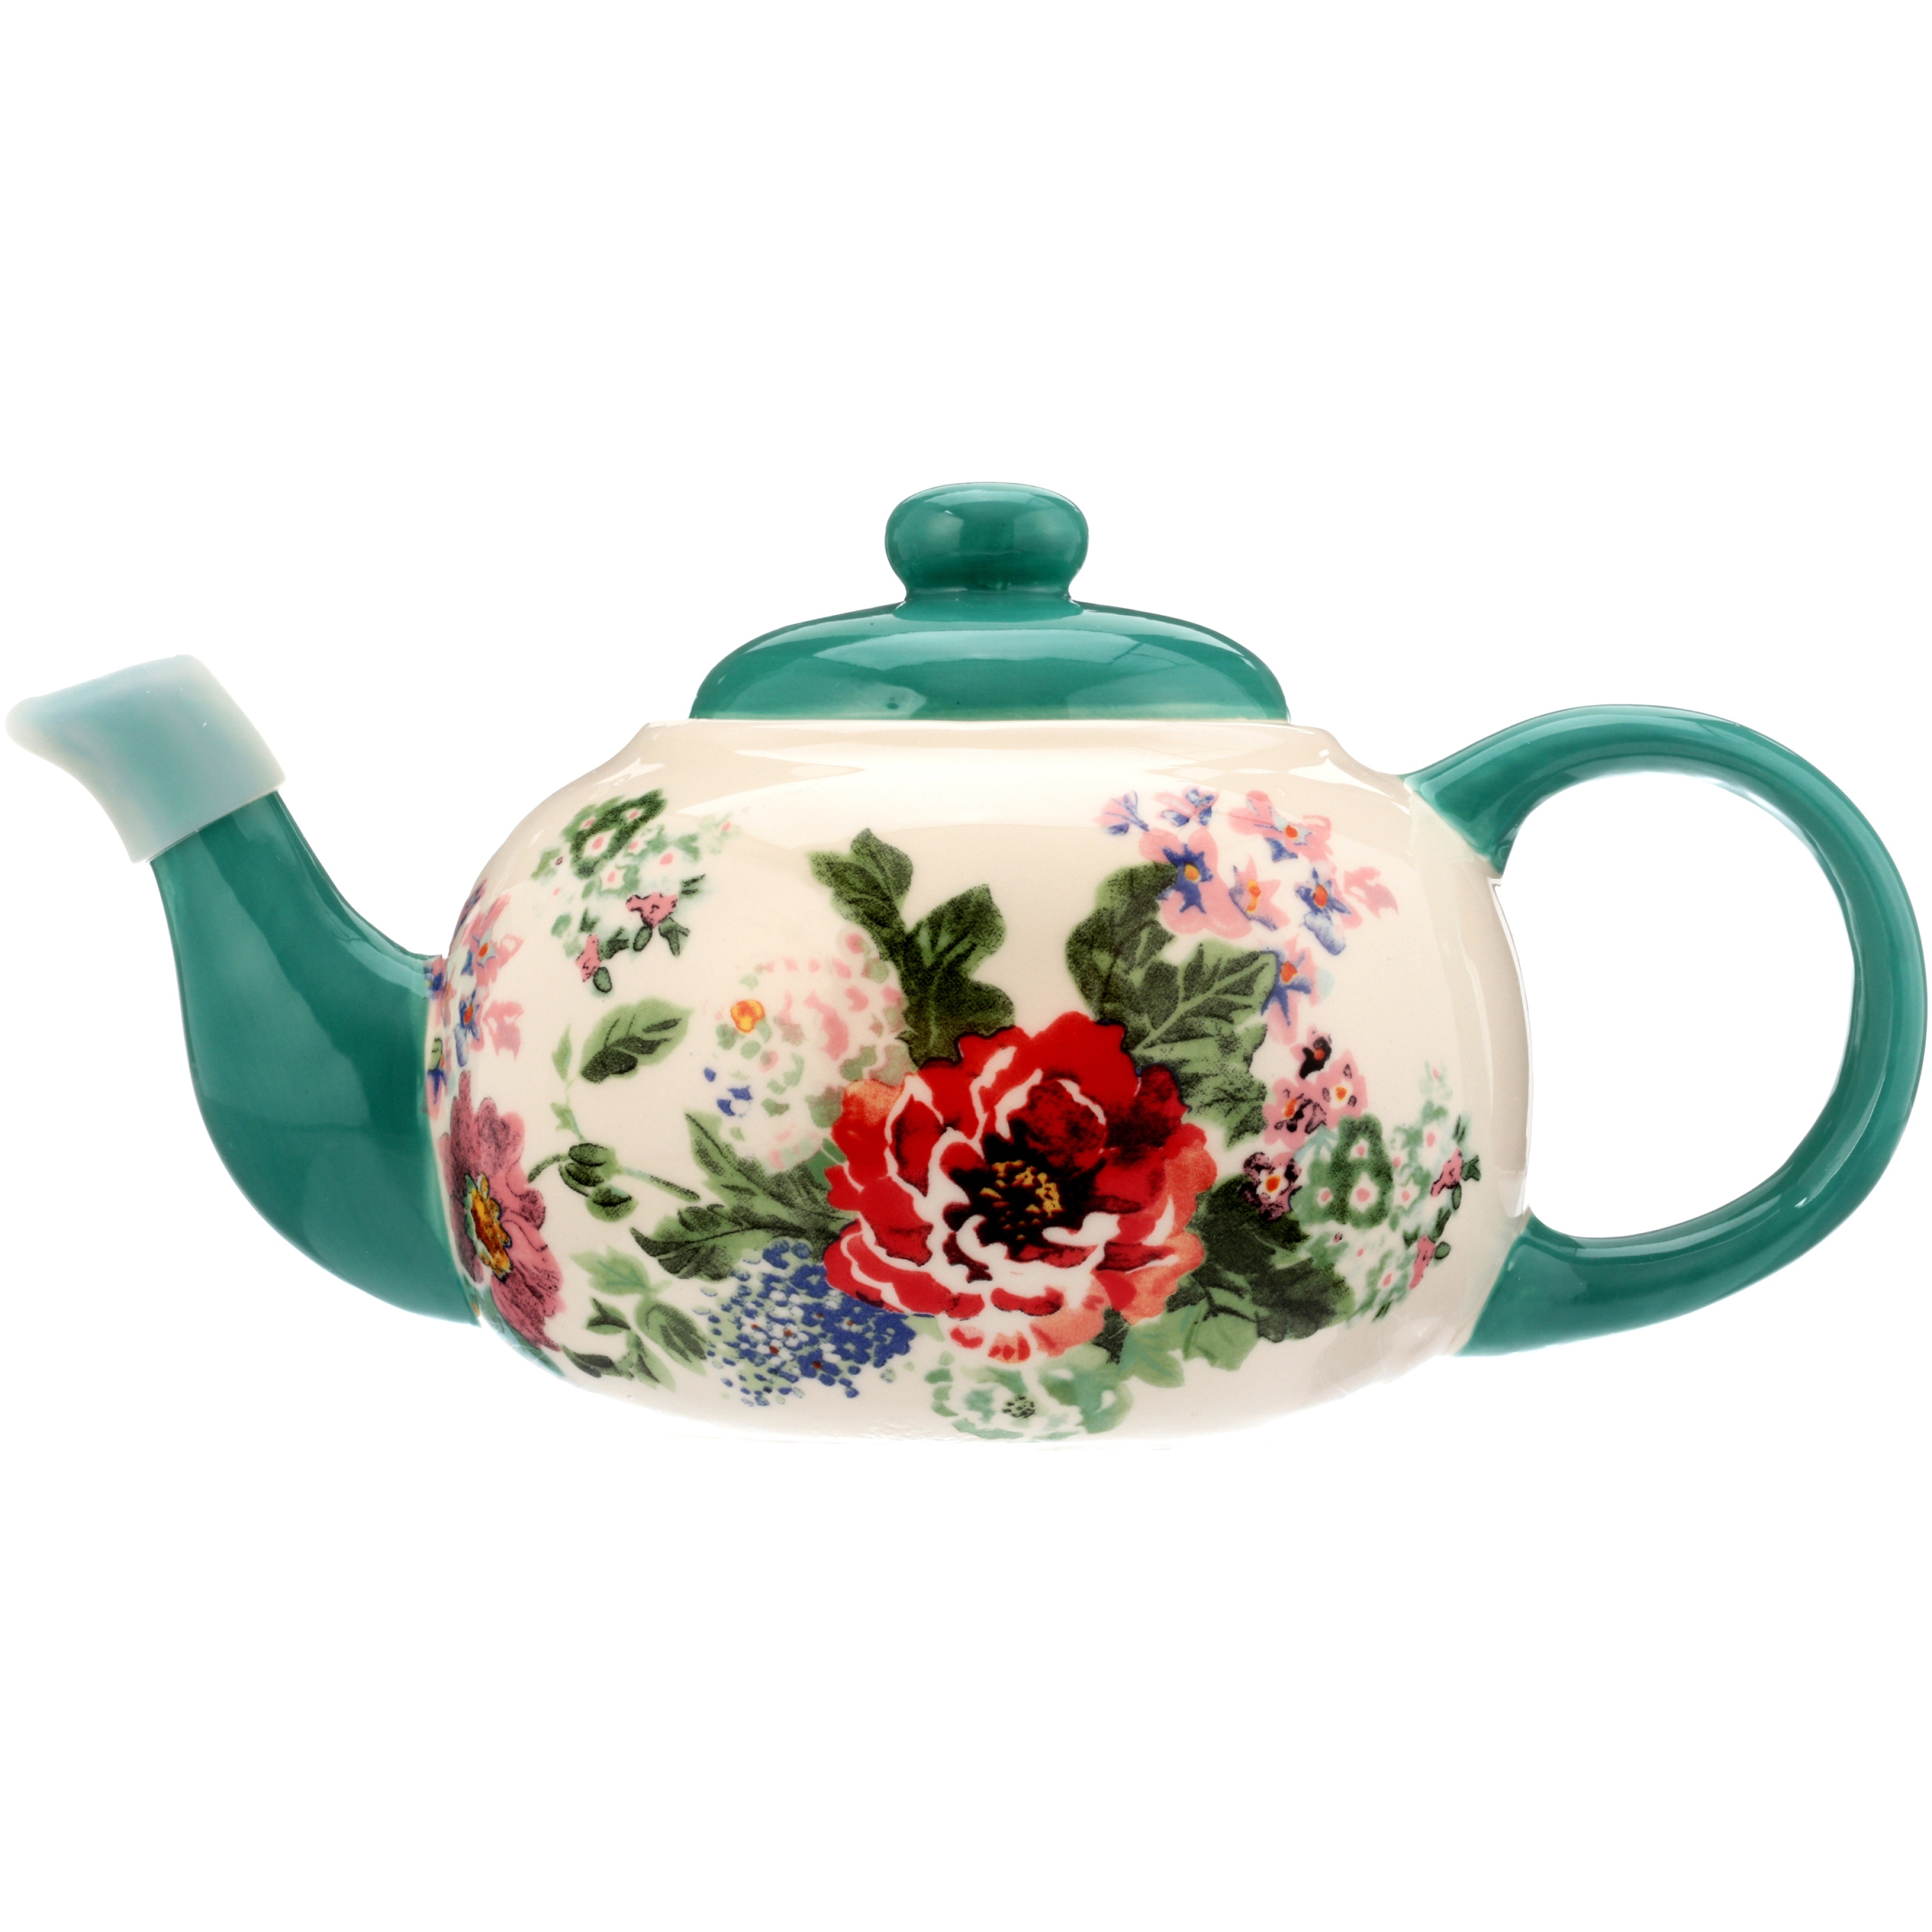 The Pioneer Woman Country Garden Teapot - image 4 of 10